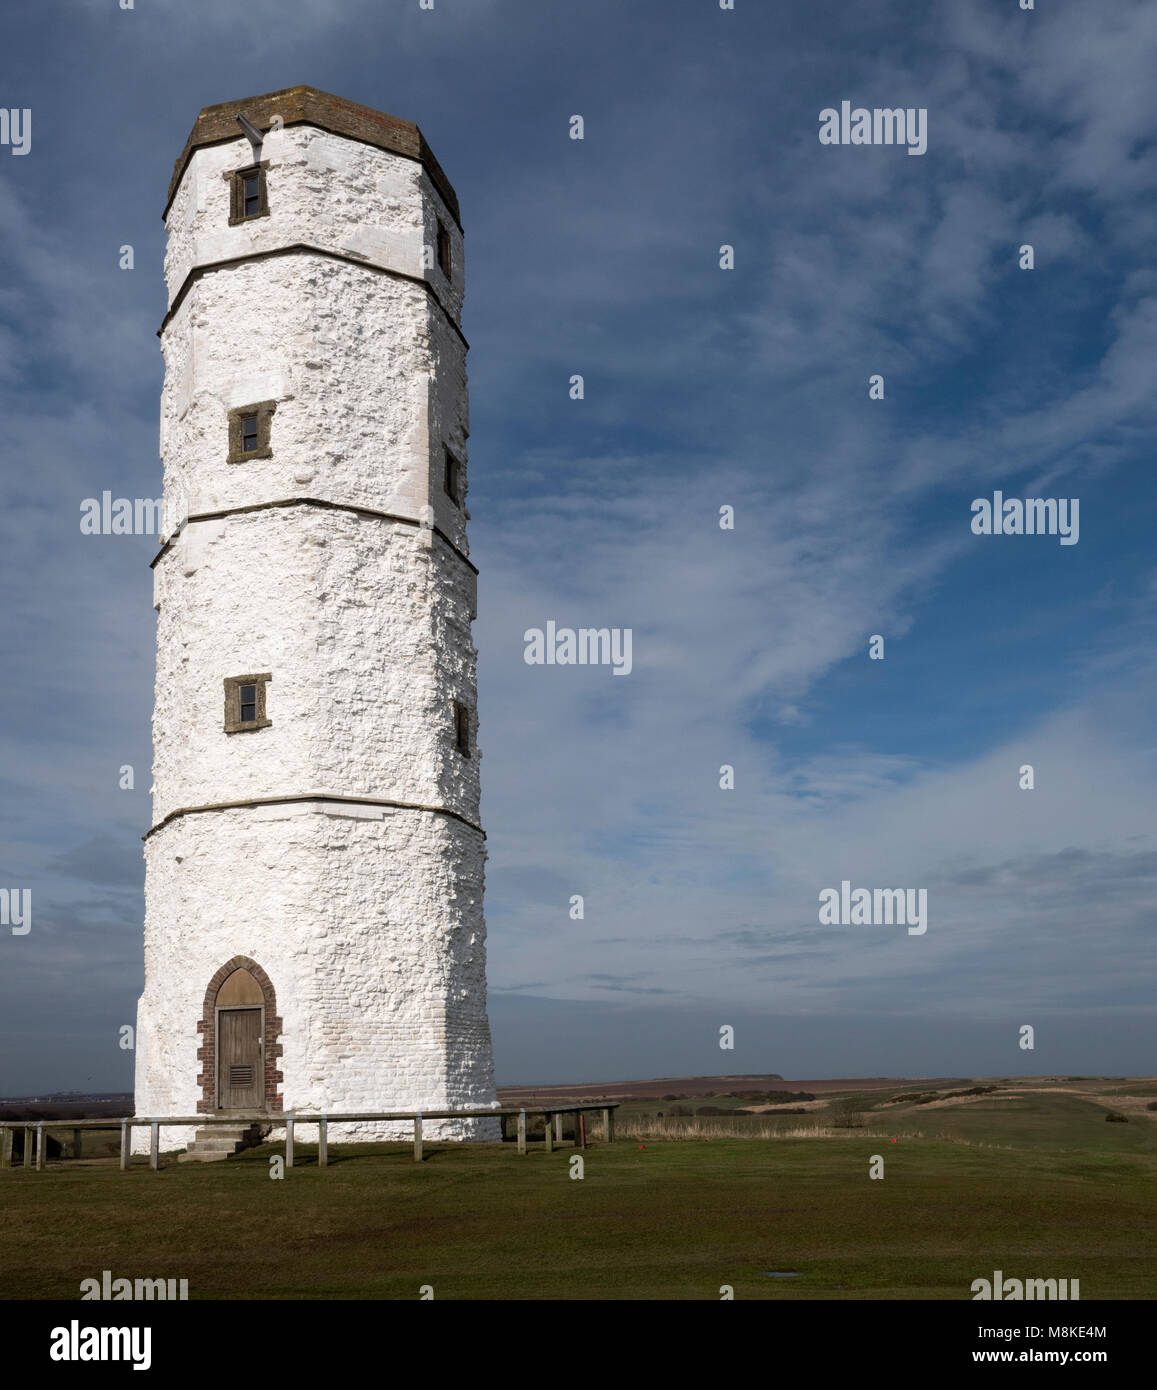 Chalk Tower - former lighthouse and oldest in the UK - at Flamborough Head, Flamborough, East Riding of Yorkshire, Yorkshire,  England, UK. Stock Photo